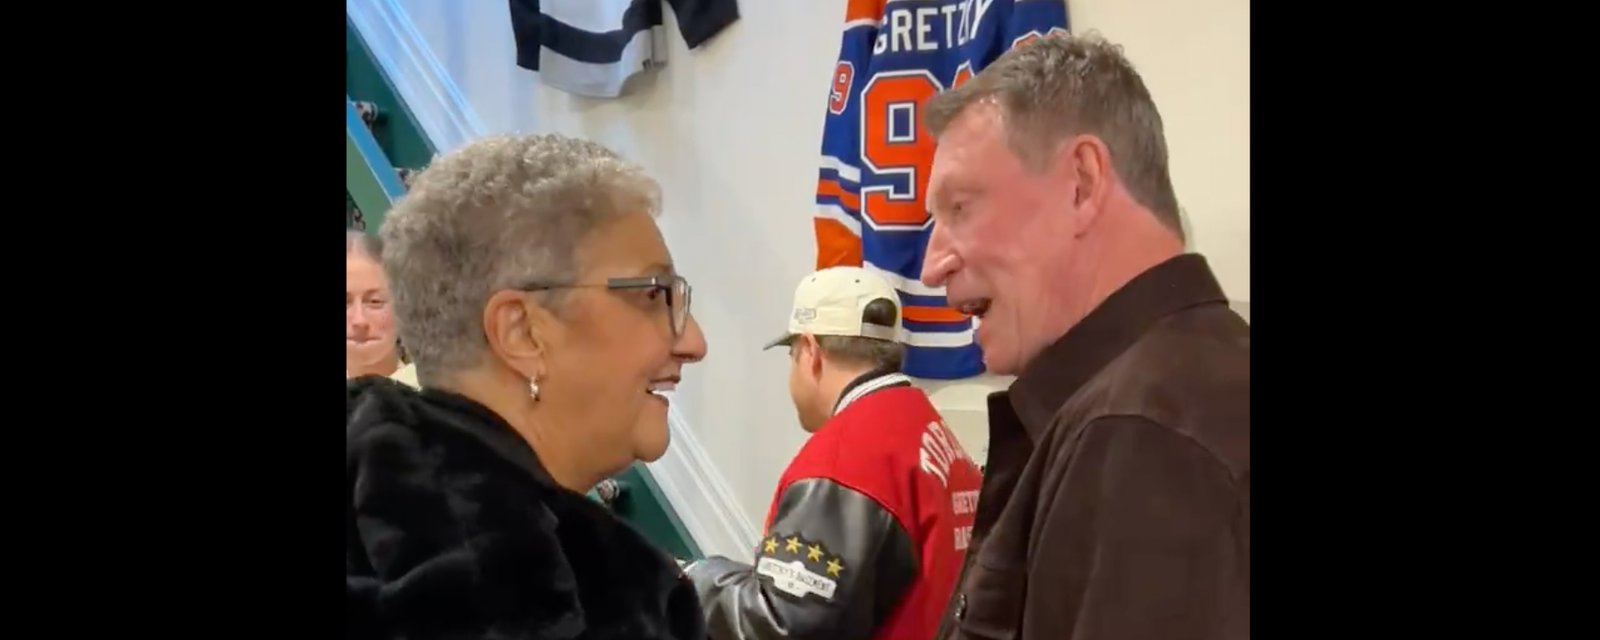 Wayne Gretzky insults Paul Bissonnette in front of Biz’s mother!